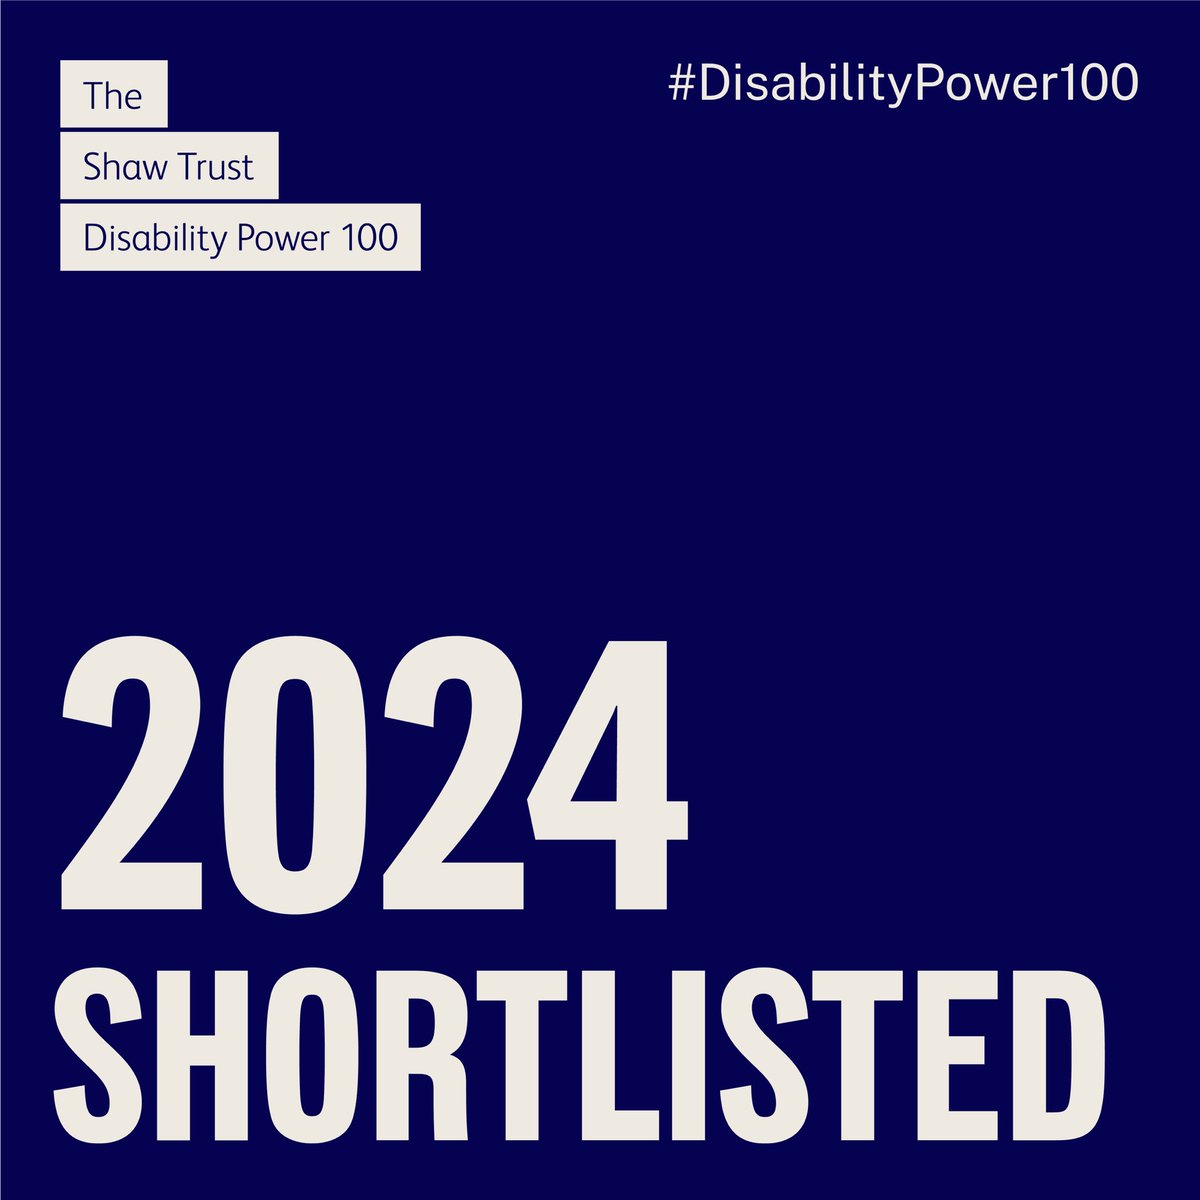 I definitely read this email a few times before my neurodivergent brain processed that I’d been shortlisted for the @ShawTrust #DisabilityPower100 ✨.

Just another day advocating for disabled and neurodivergent people to have equal access and better quality of life.